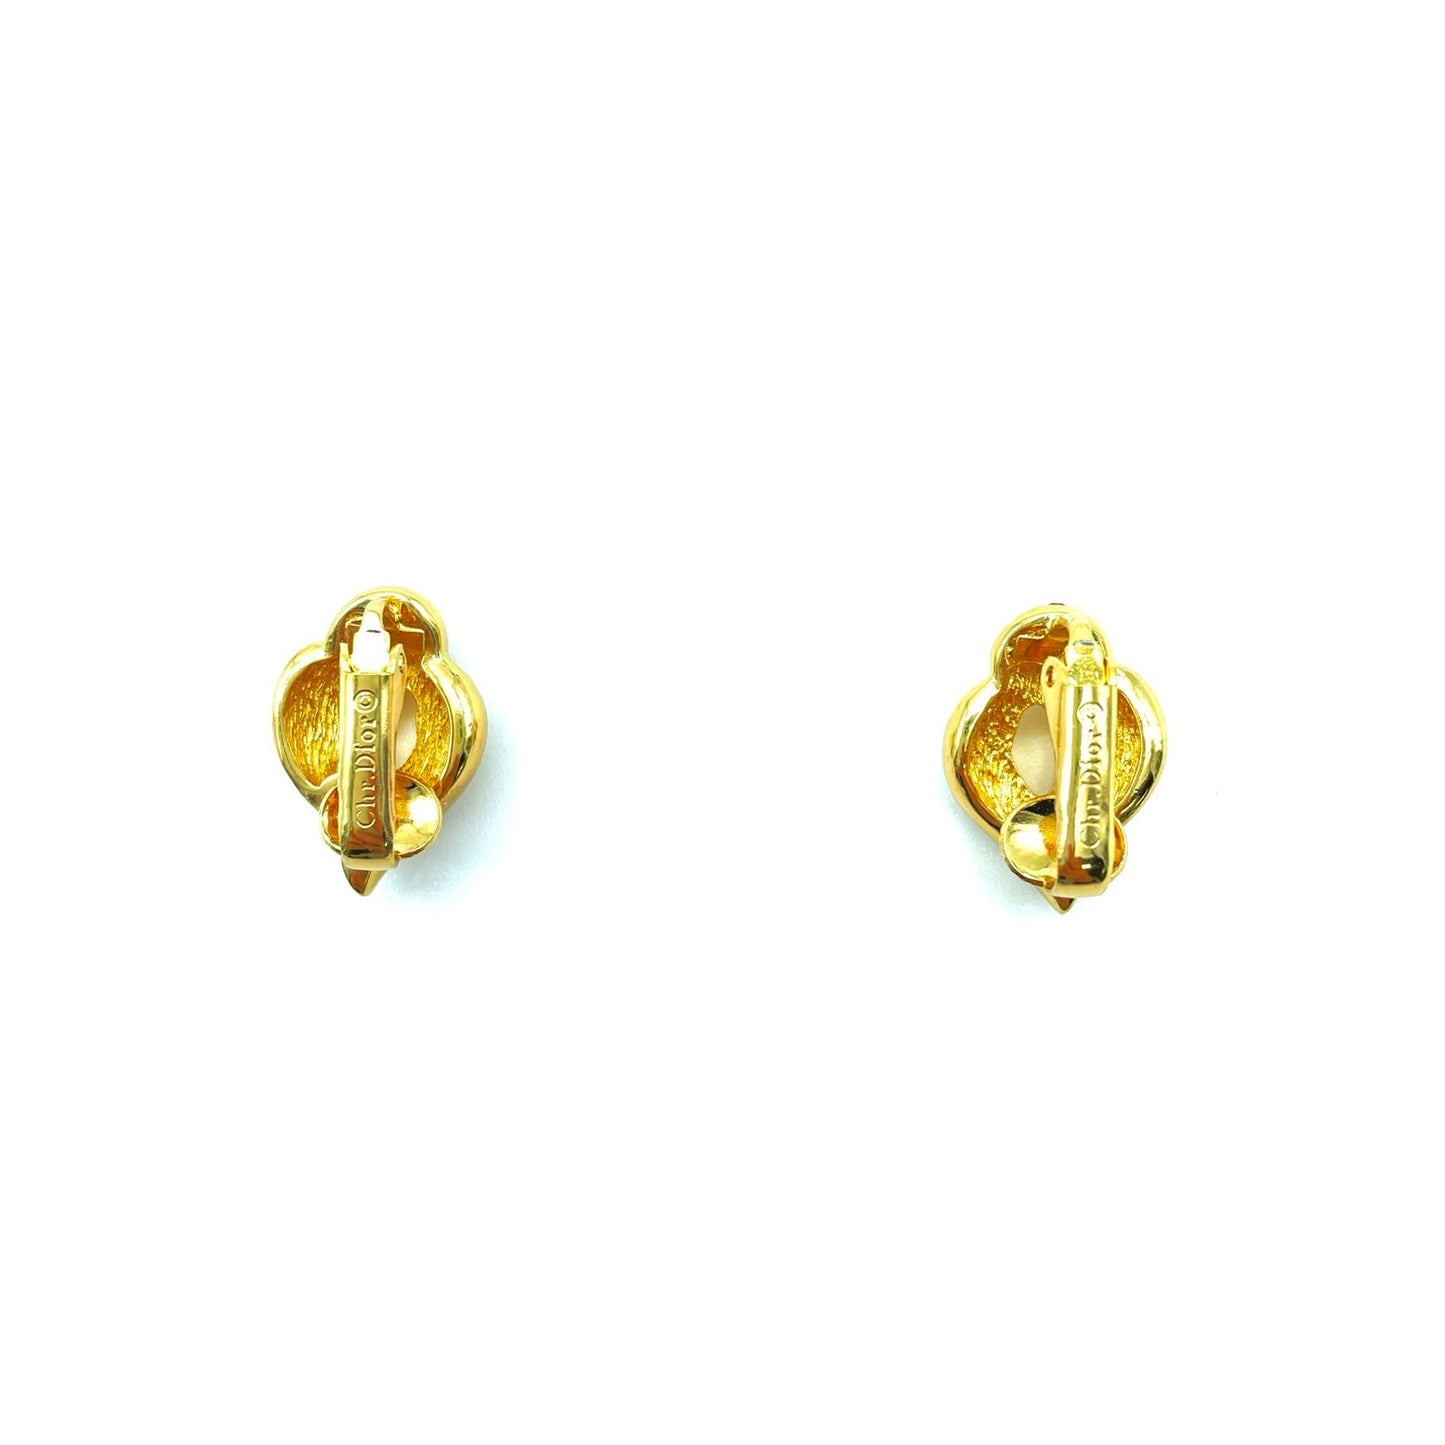 Christian Dior stone earrings gold vintage old si2vi7